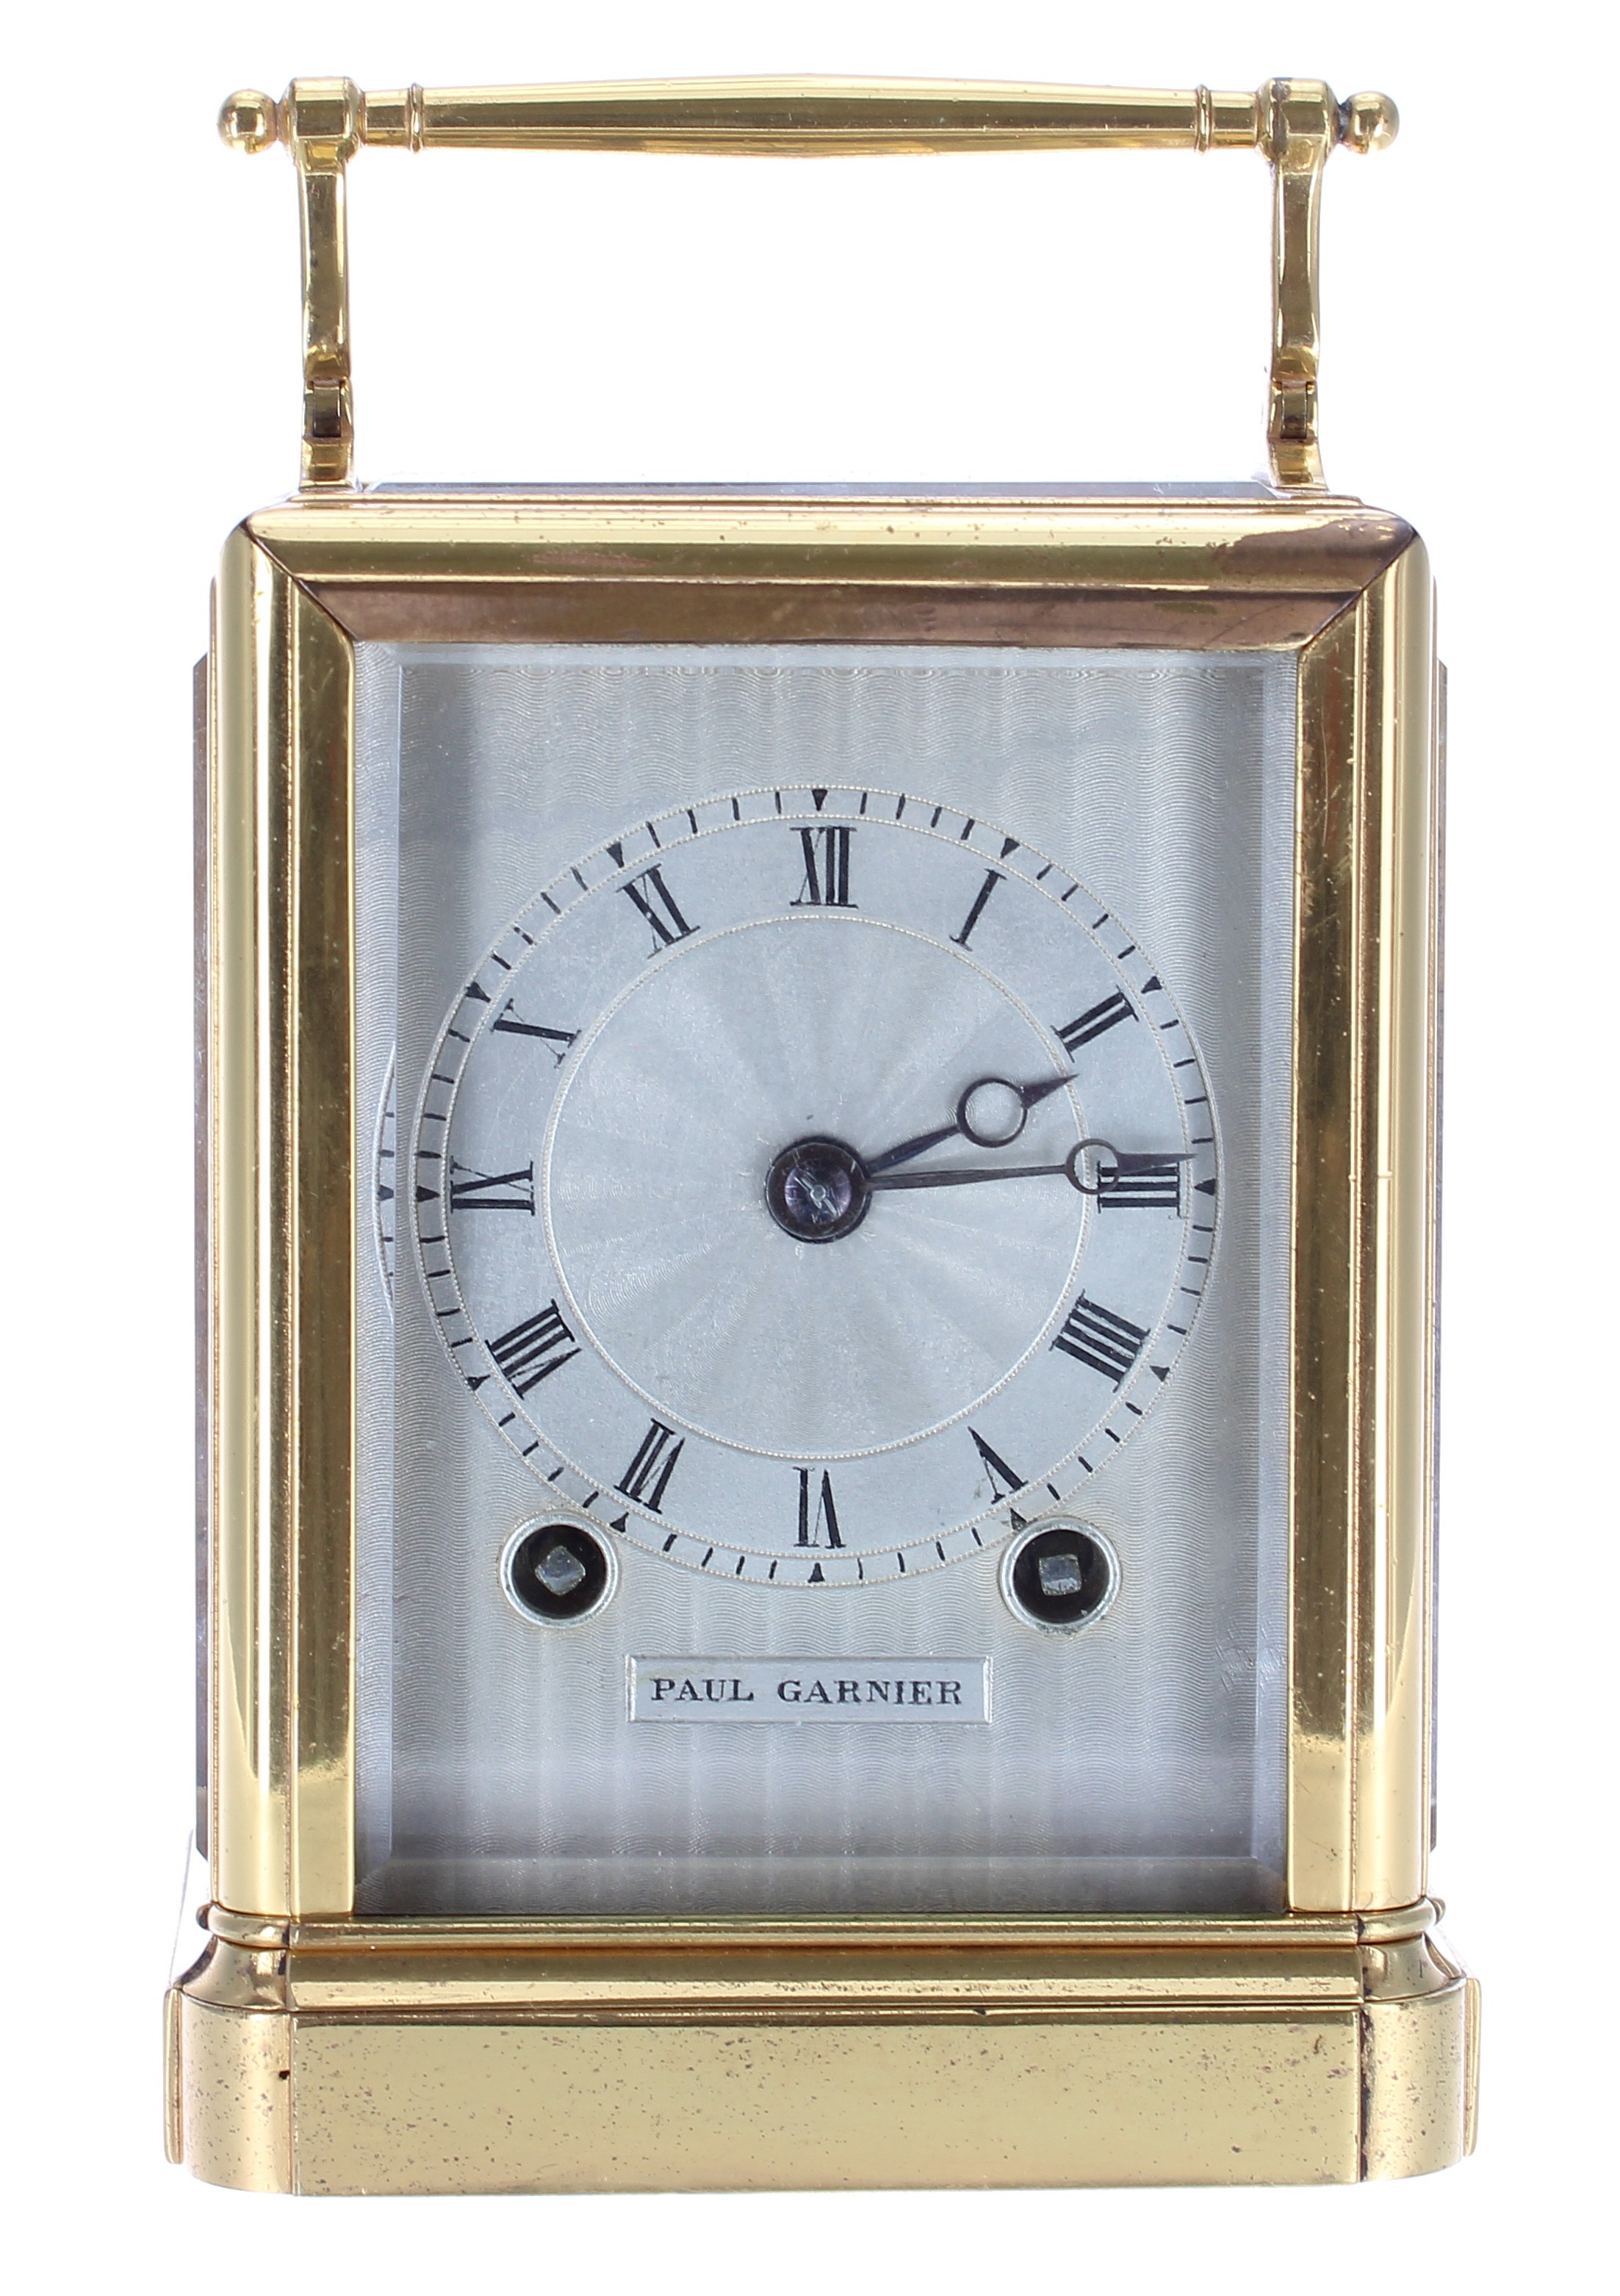 Good small Paul Garnier carriage clock striking the hours and half hours on a bell, the movement